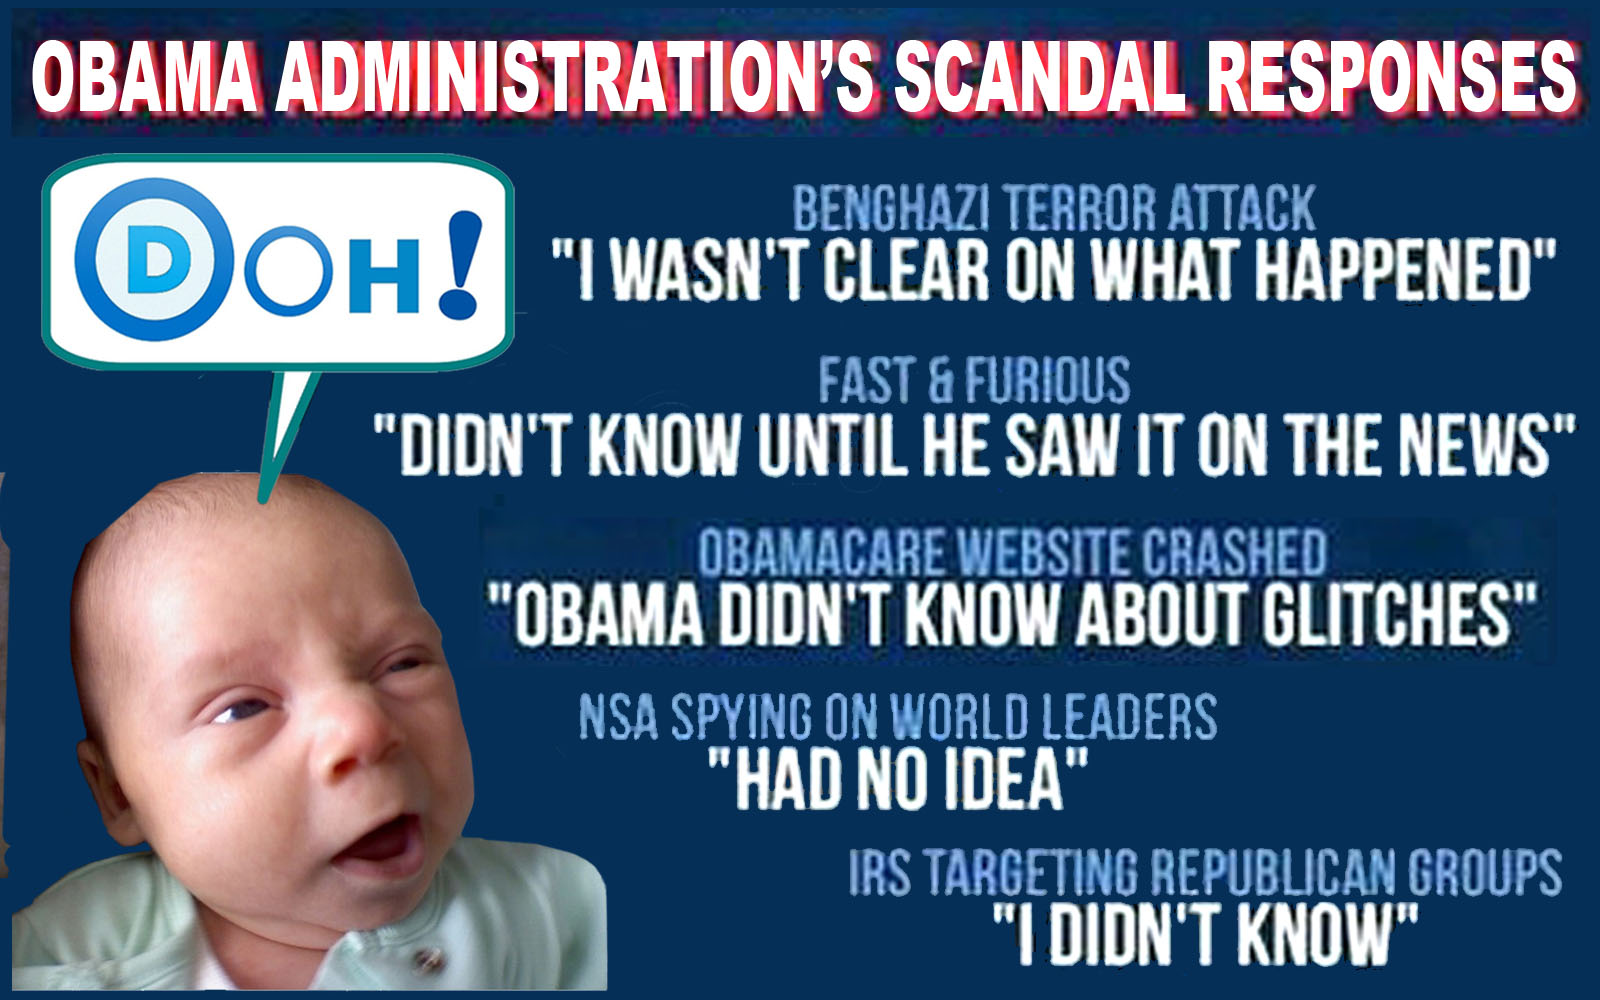 What were some scandals during the Obama administration?